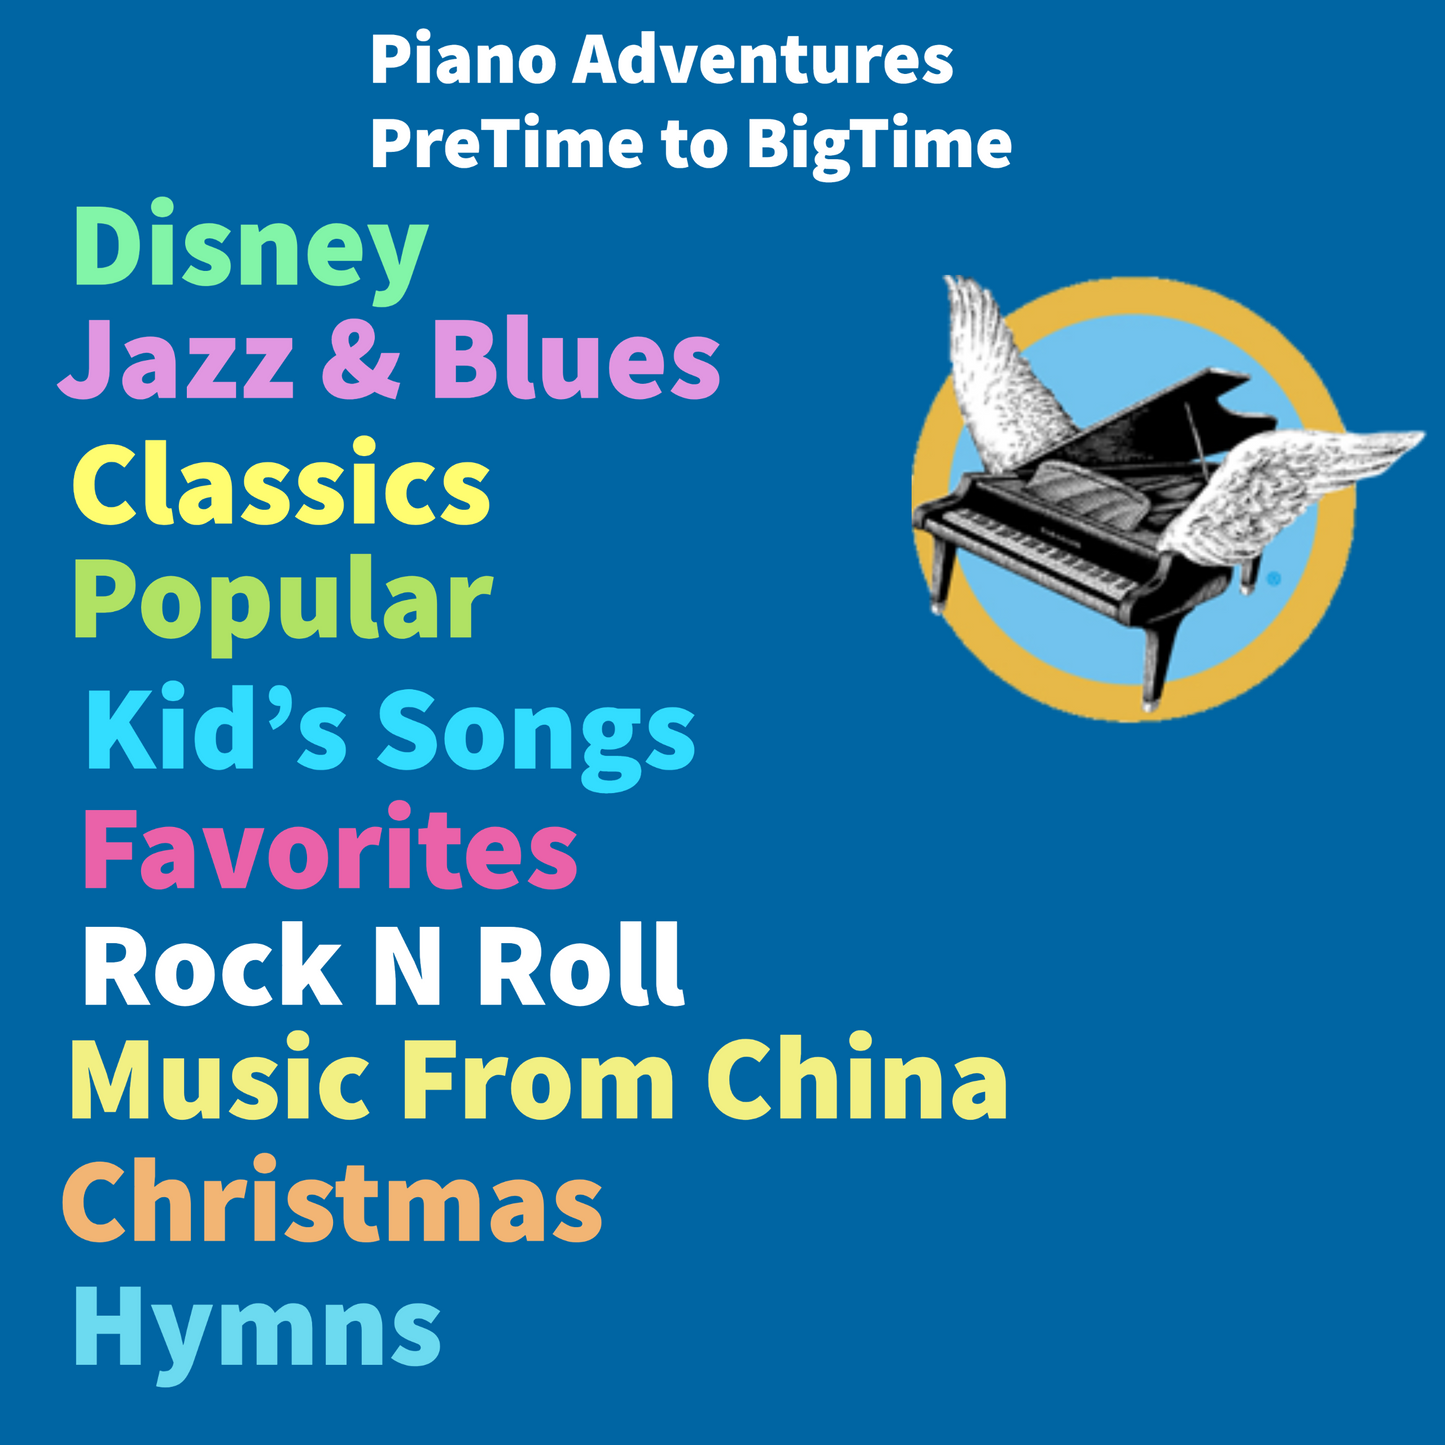 Faber Piano Adventures: Funtime Studio Collection 3A-3B Book & Keyboard